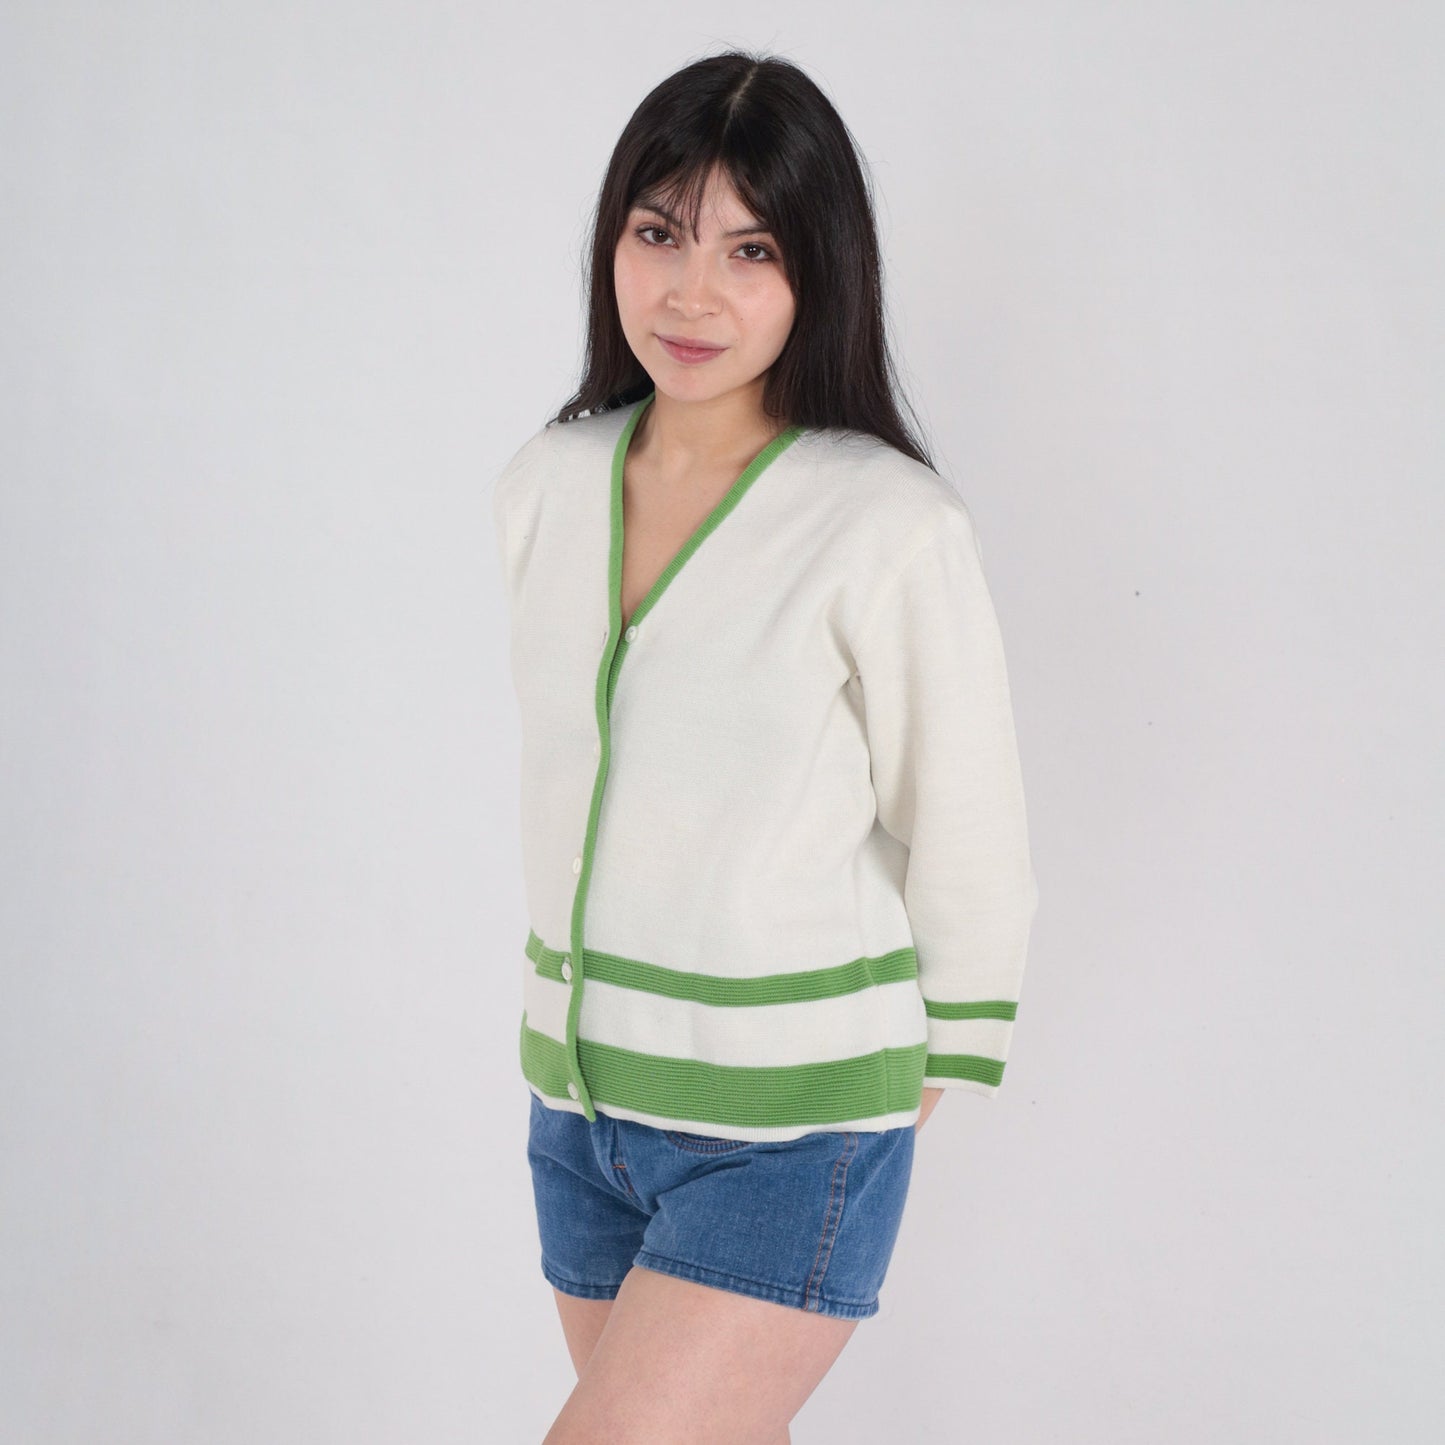 Striped Wool Cardigan 70s Button Up Knit Sweater White Green Stripes Retro Preppy V Neck Basic Seventies Knitwear Vintage 1970s Small S